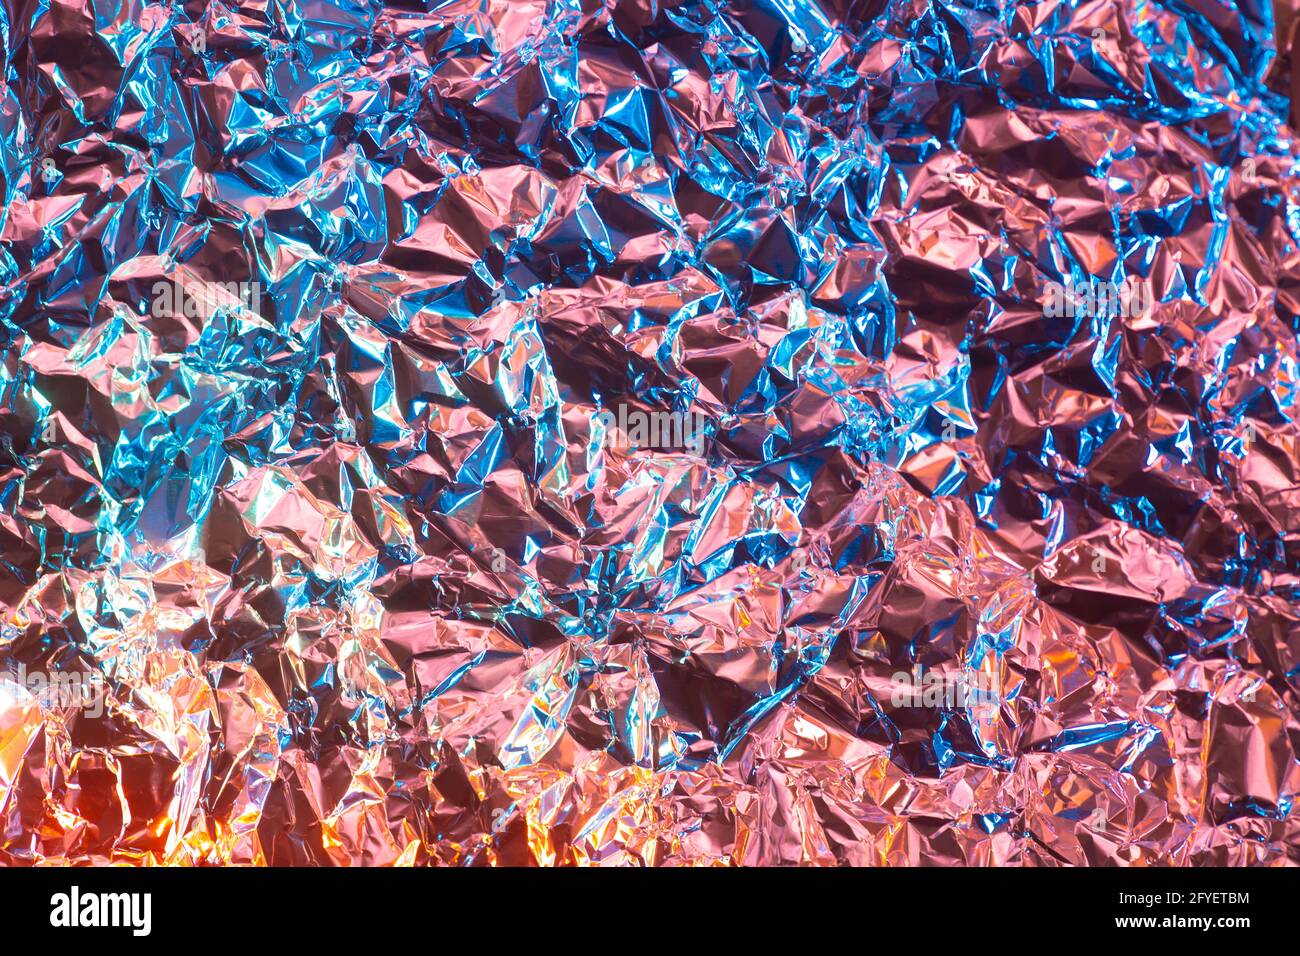 https://c8.alamy.com/comp/2FYETBM/abstract-chrome-background-with-rose-gold-and-vibrant-blue-color-and-glossy-rough-texture-metall-foil-paper-crumpled-modern-glance-futuristic-backgr-2FYETBM.jpg